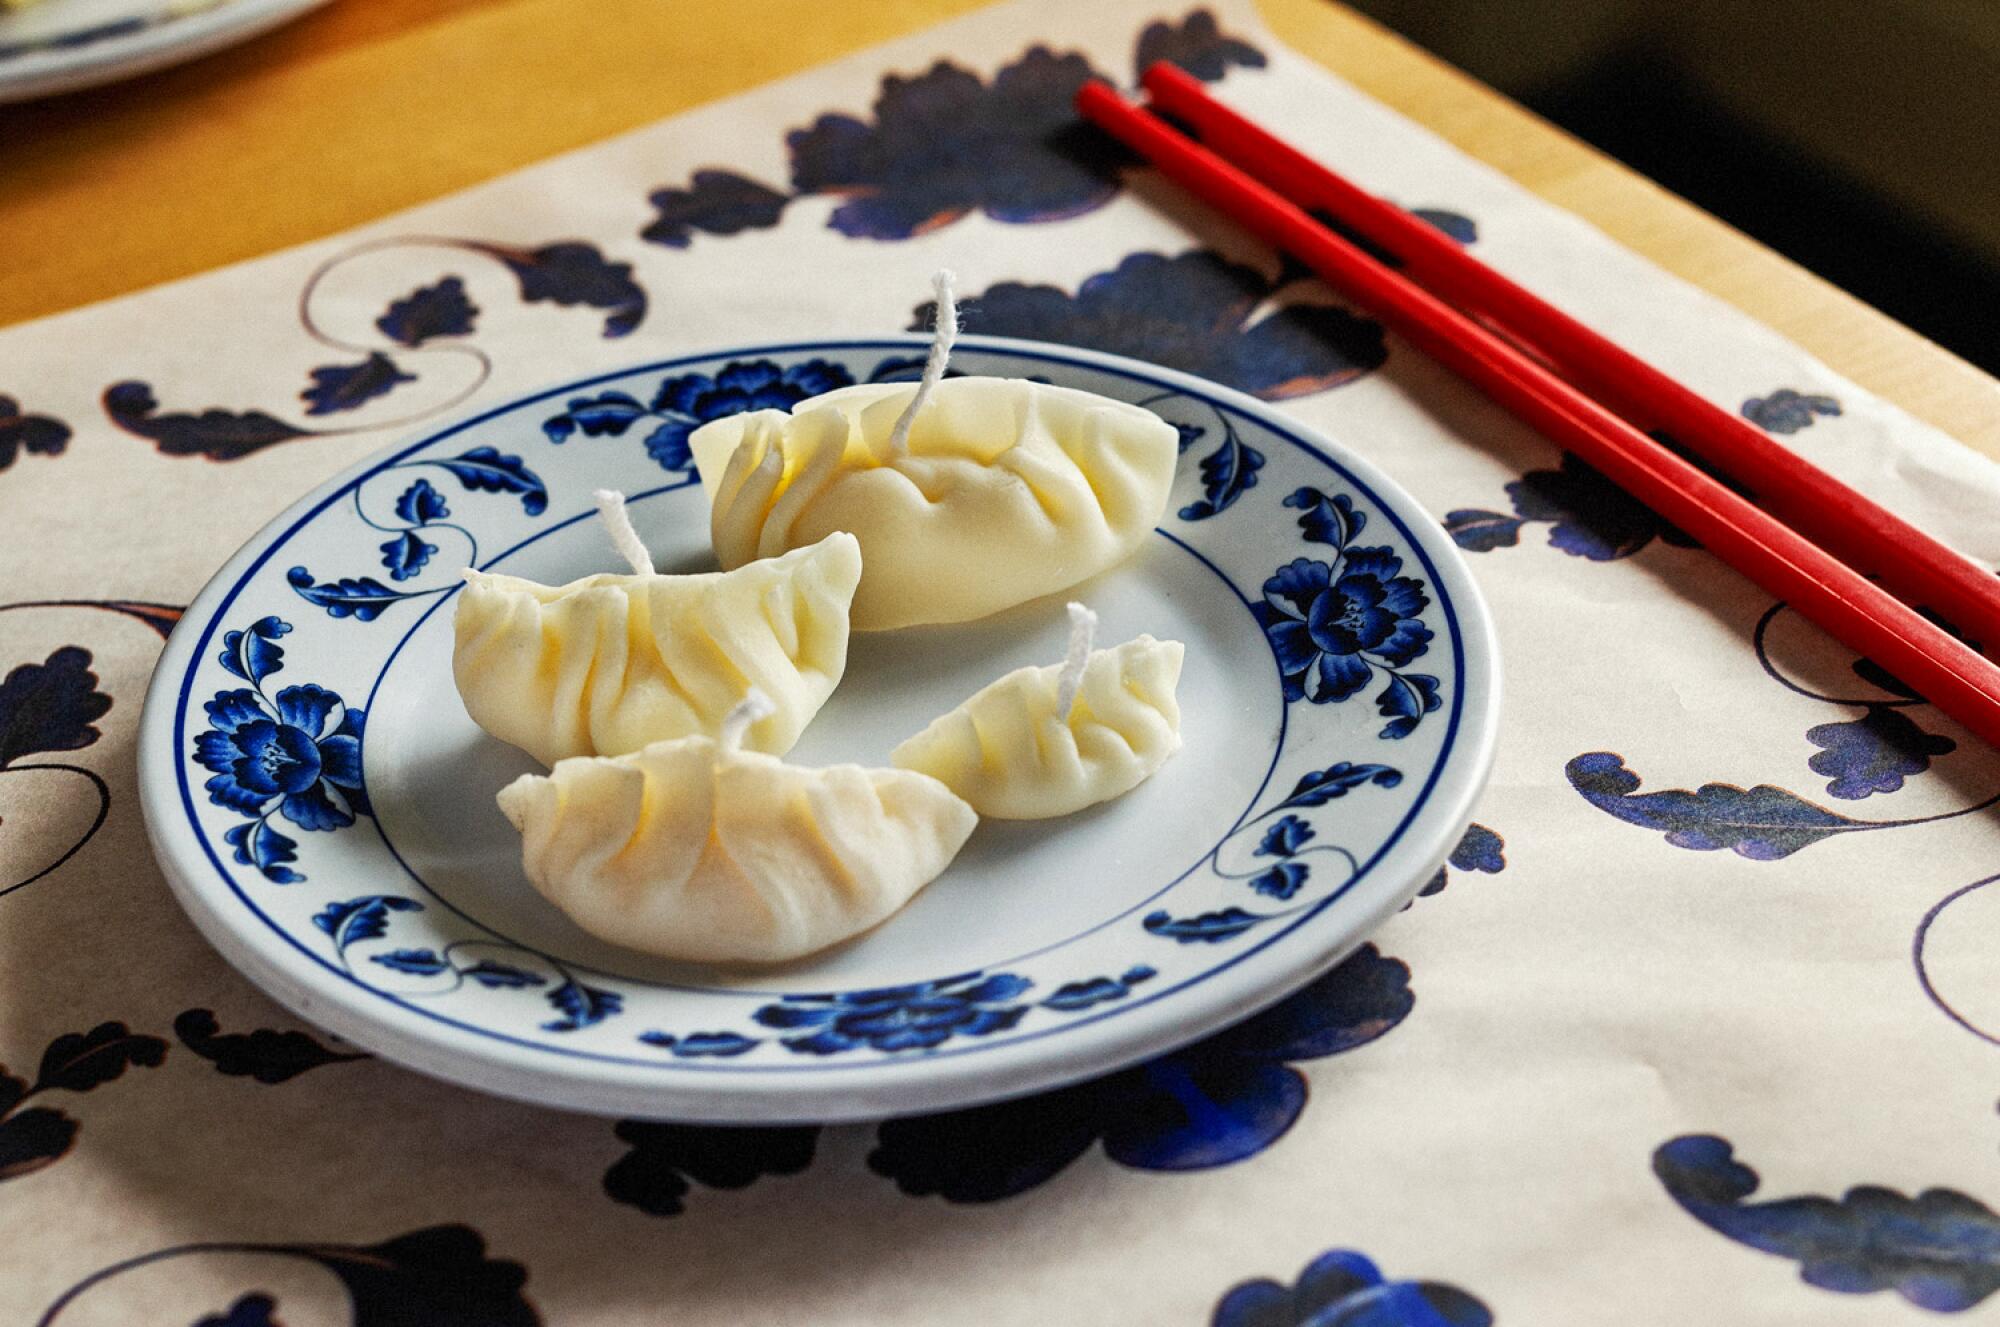 Four candles by Woon in the shape of dumplings rest on a white and blue plate with chopsticks alongside